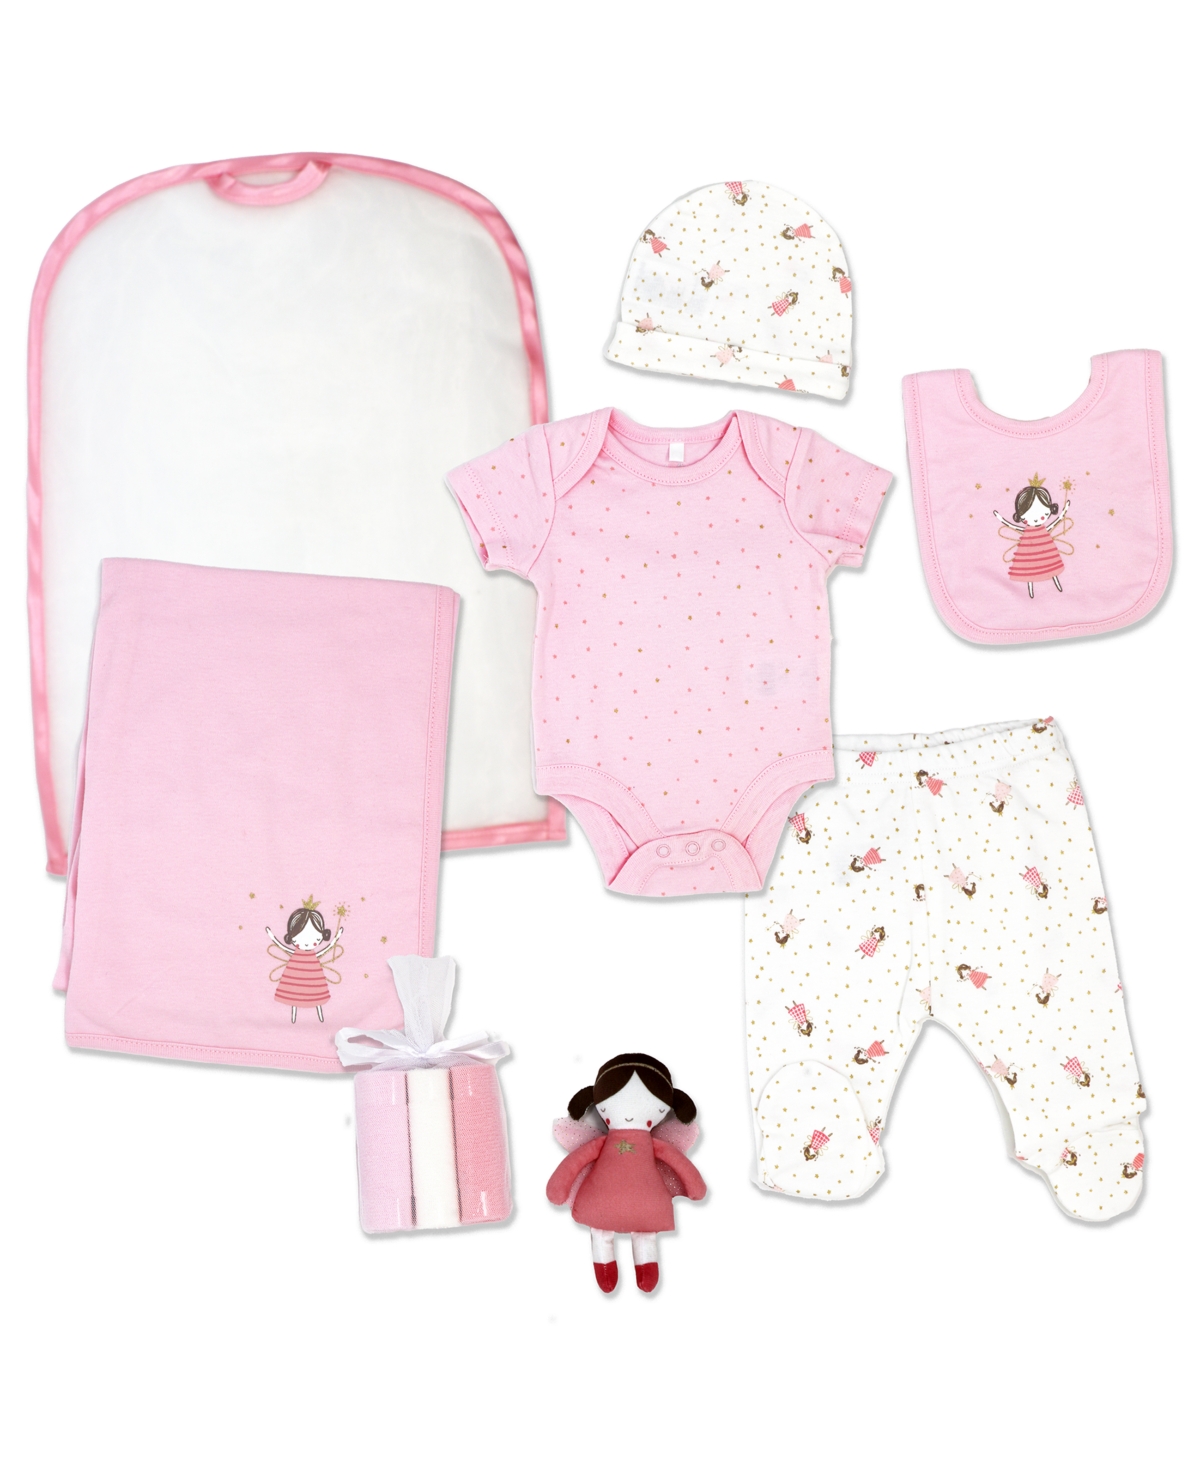 Rock-a-bye Baby Boutique Baby Girls Little Fairy Layette Gift, 10 Piece Set In Light Pink